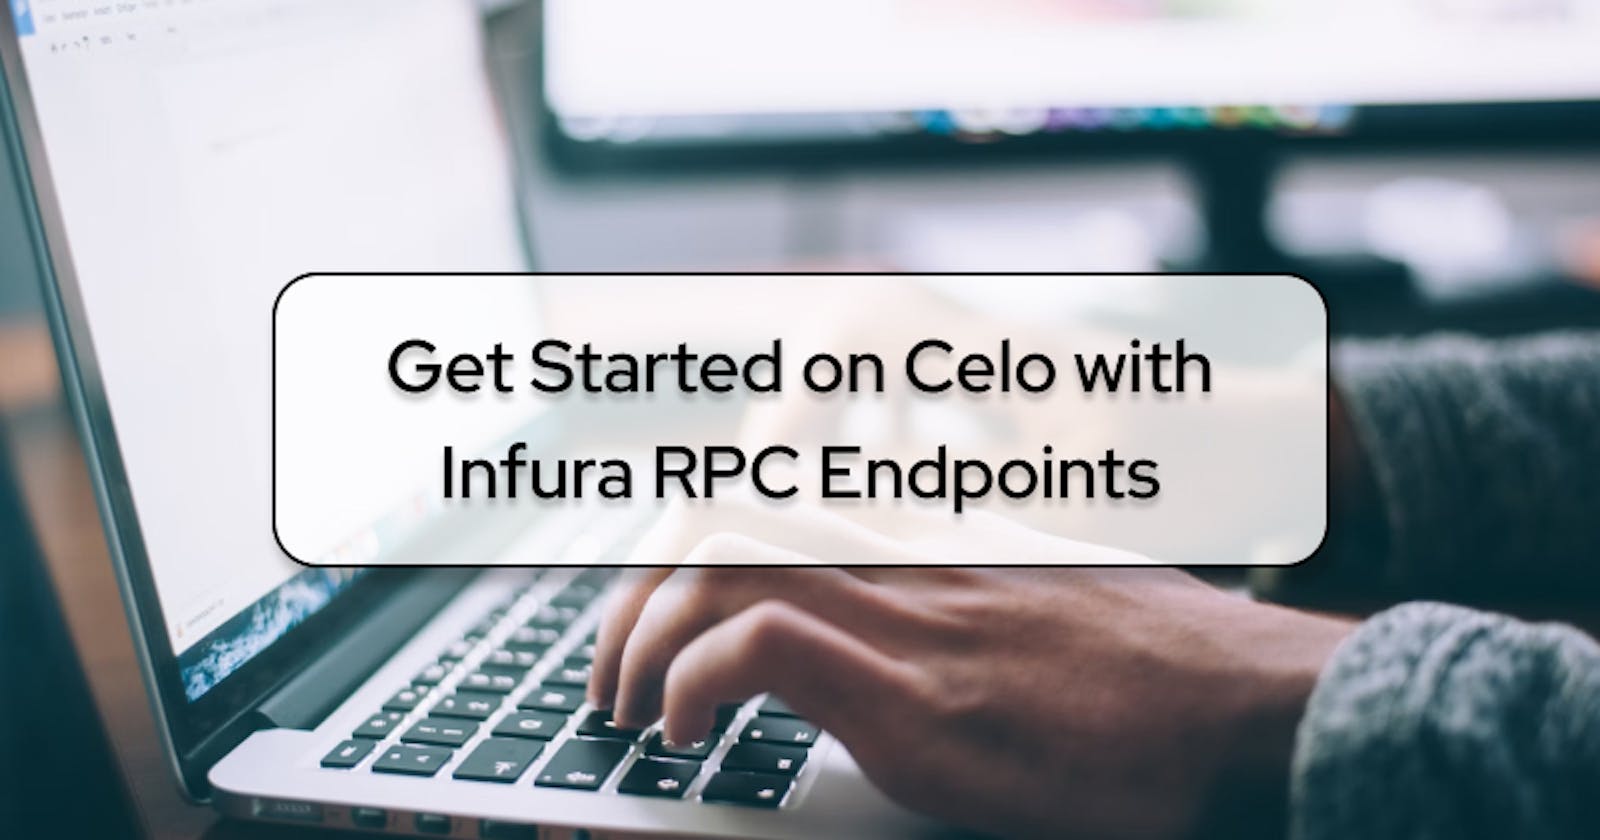 Get Started on Celo with Infura RPC Endpoints